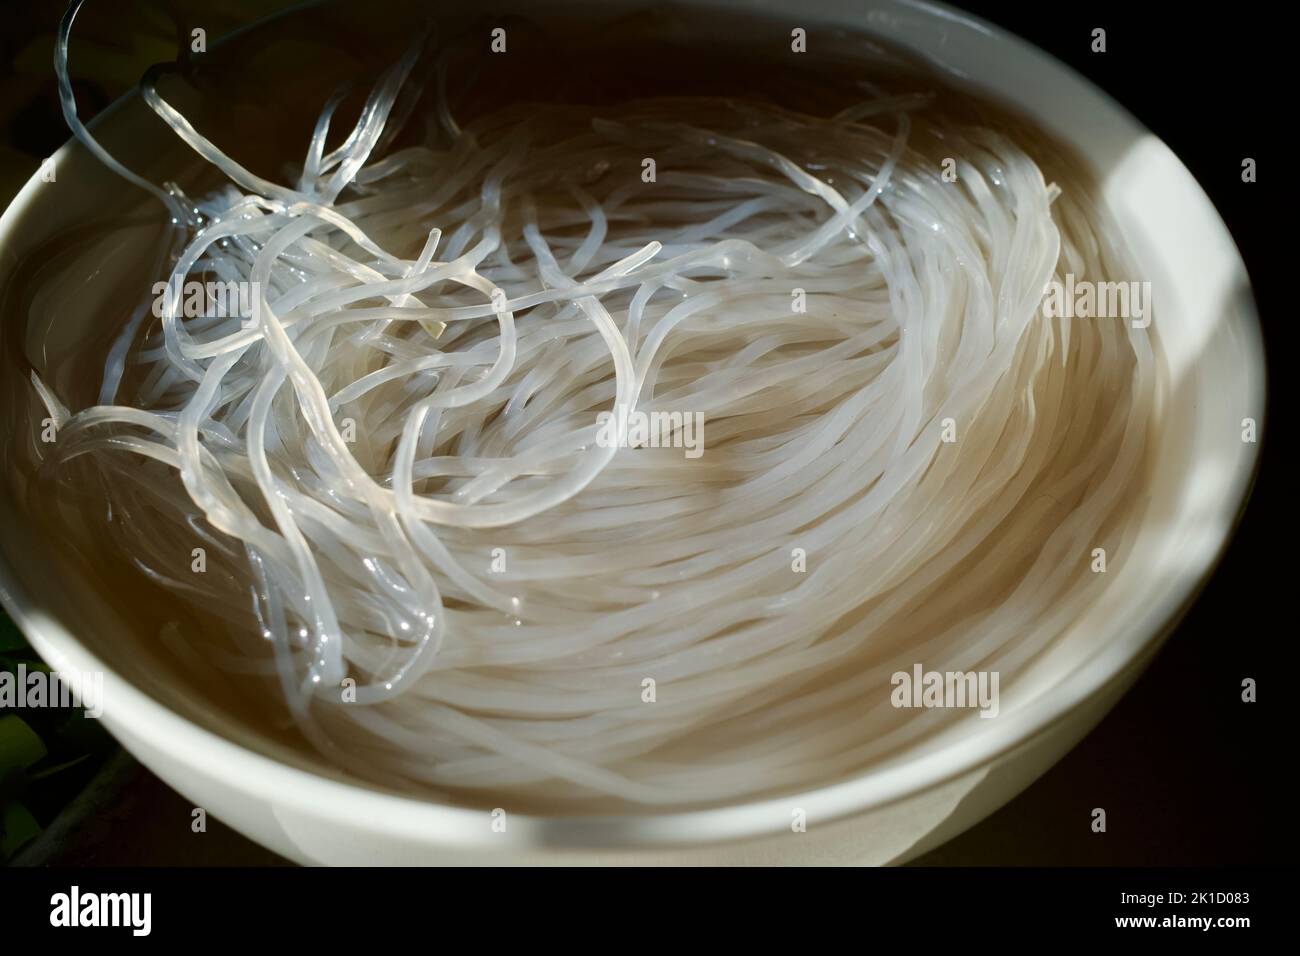 Uncooked glass noodles soaked in water. The photo was taken under natural light on a kitchen worktop Stock Photo